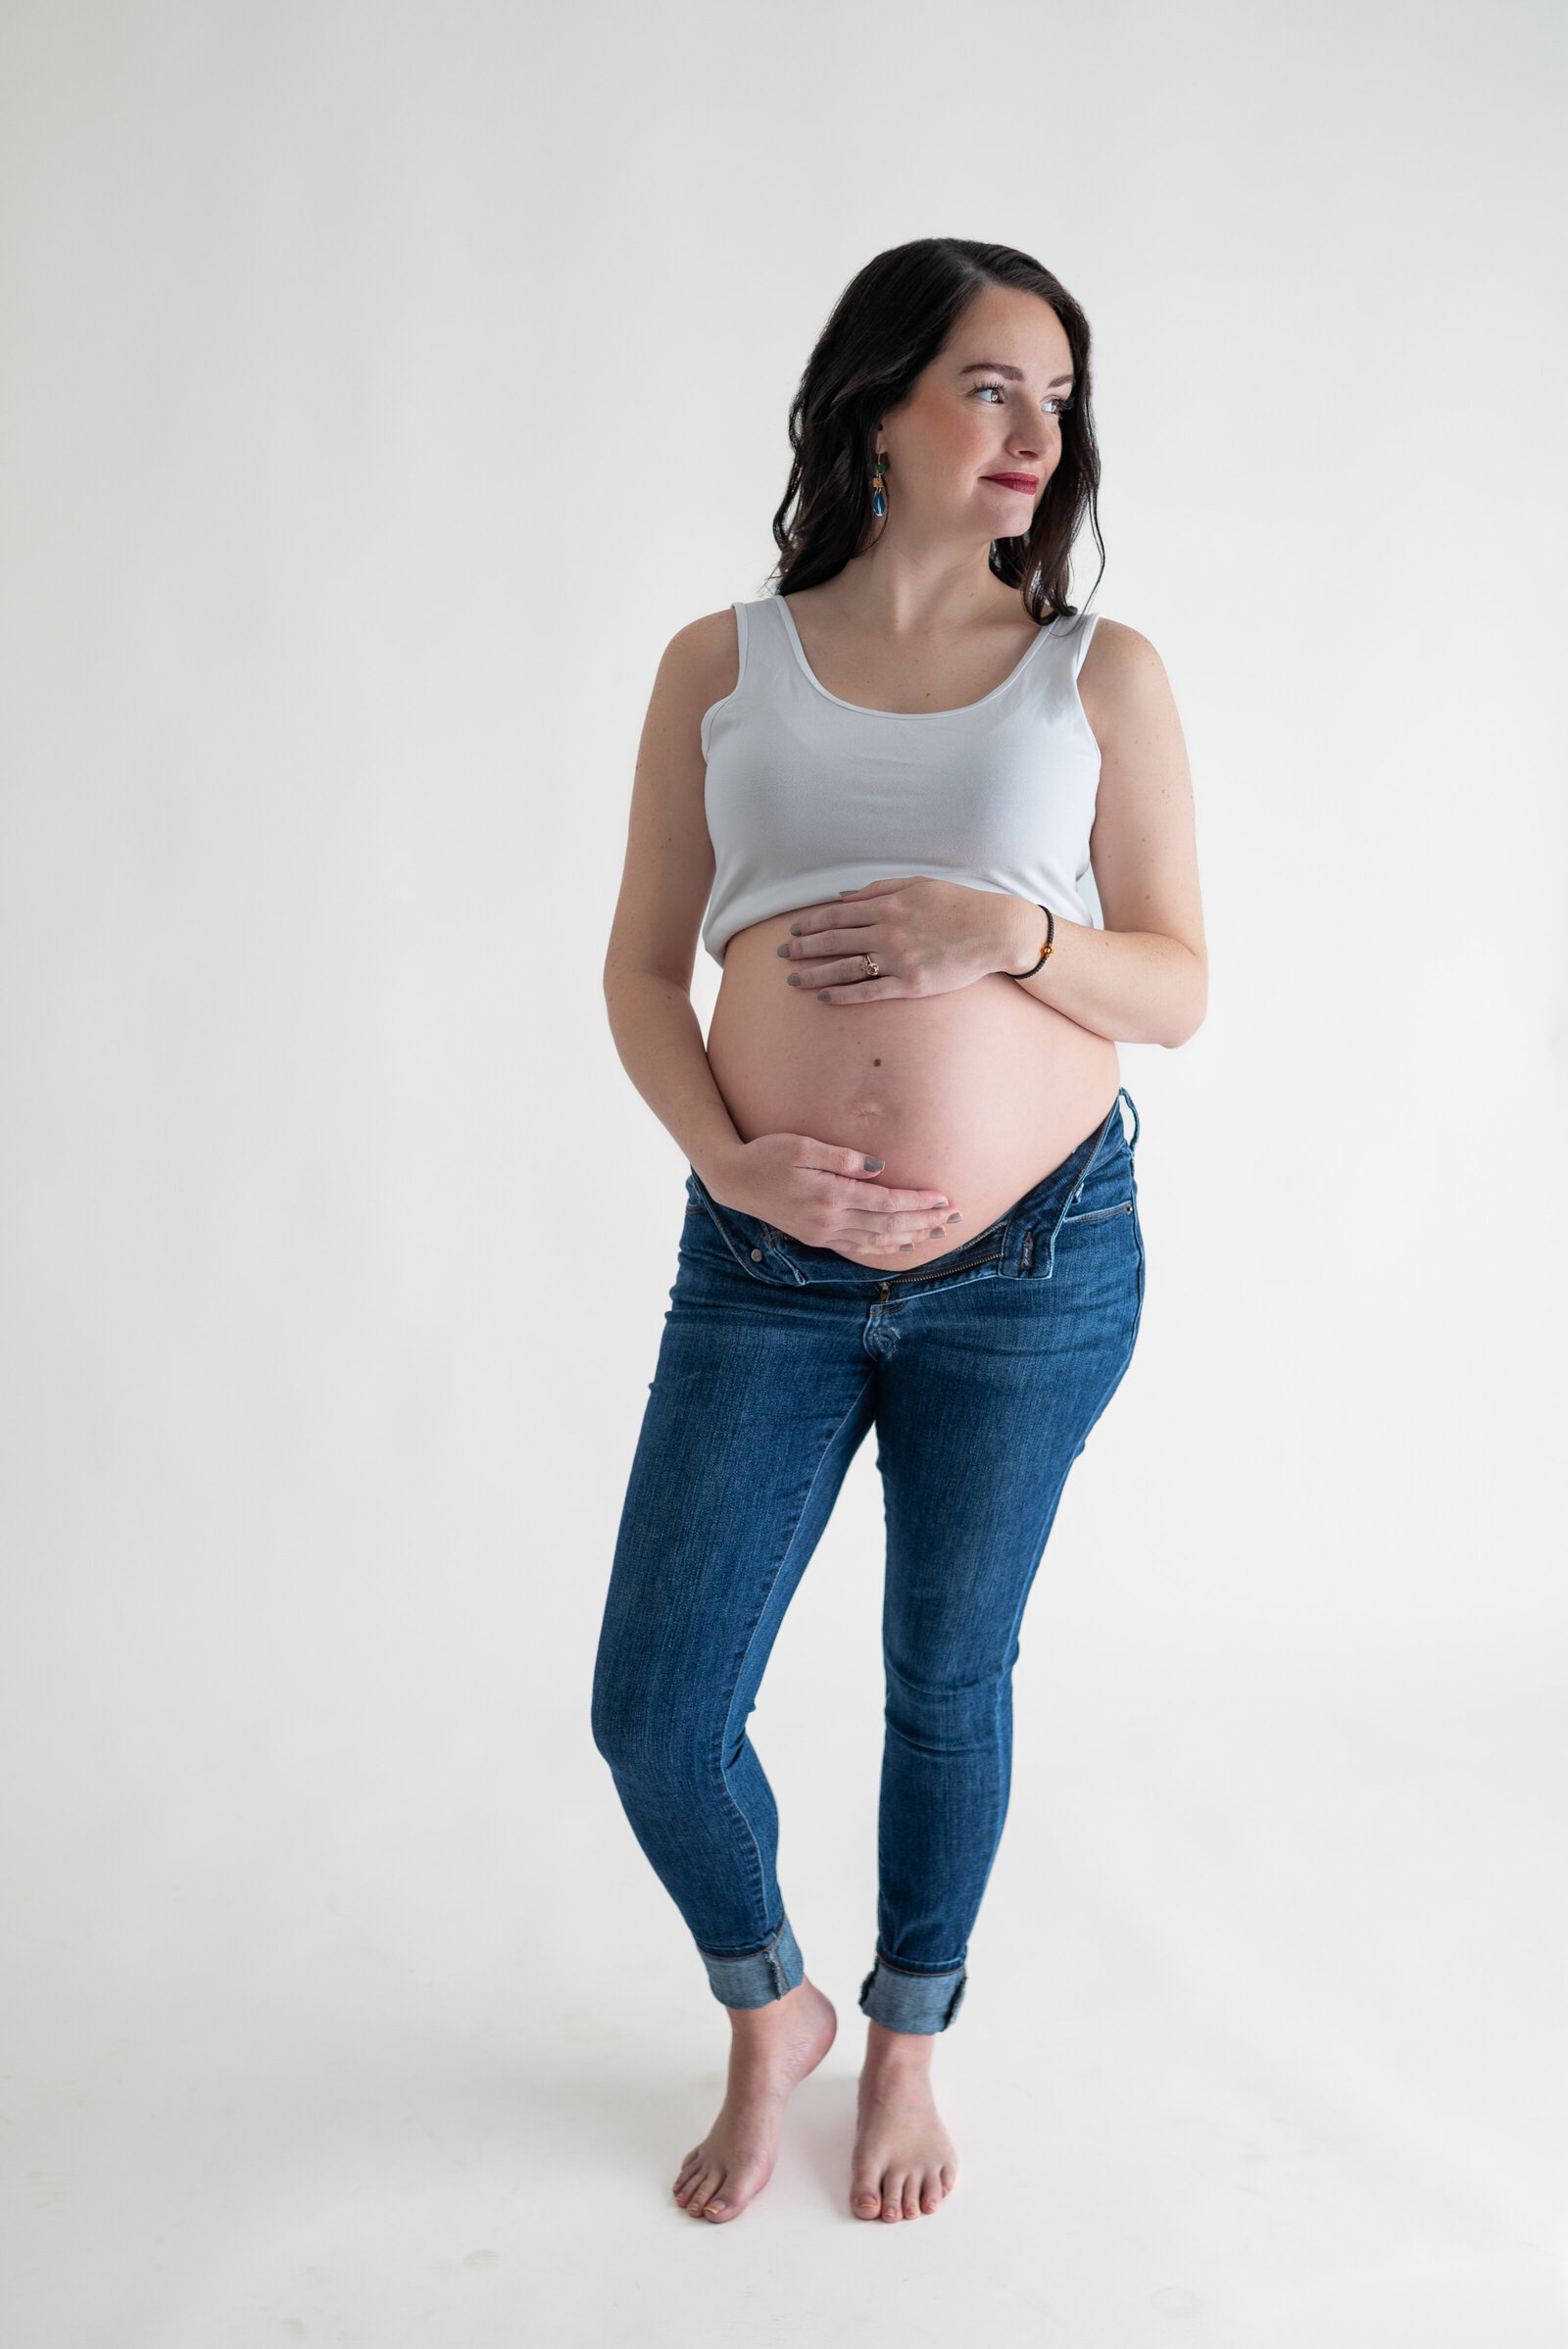 A pregnant woman in a tank top and jeans and holding her stomach while posing for her maternity photos in Huntsville Alabama